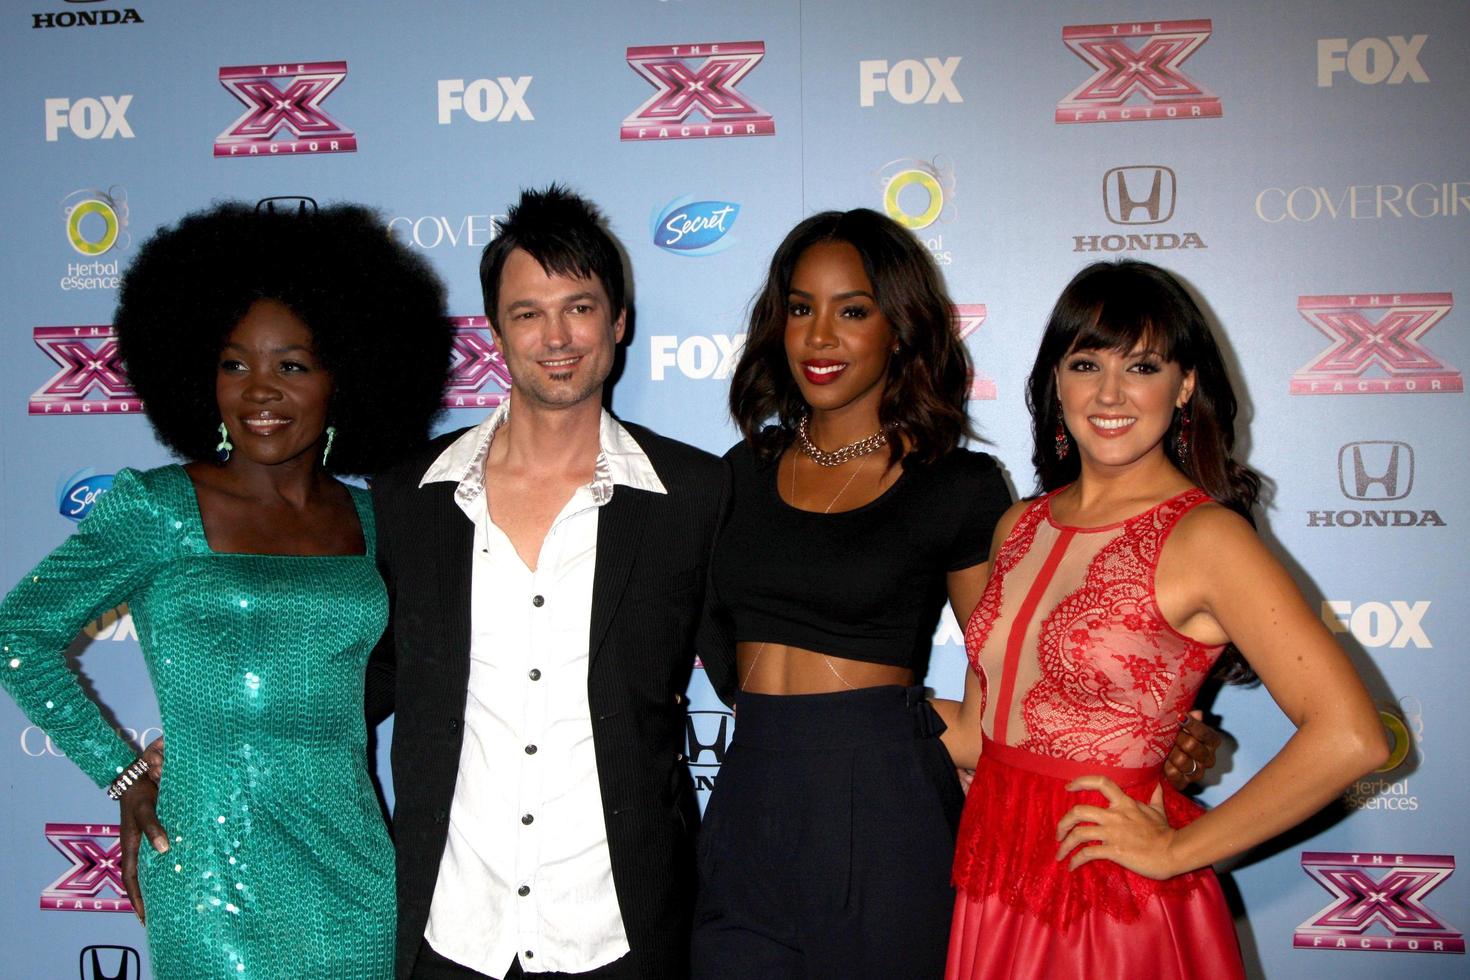 LOS ANGELES, NOV 4 - Lillie McCloud, jeff Gutt, Kelly Rowland, Rachel Potter at the 2013 X Factor Top 12 Party at SLS Hotel on November 4, 2013 in Beverly Hills, CA photo